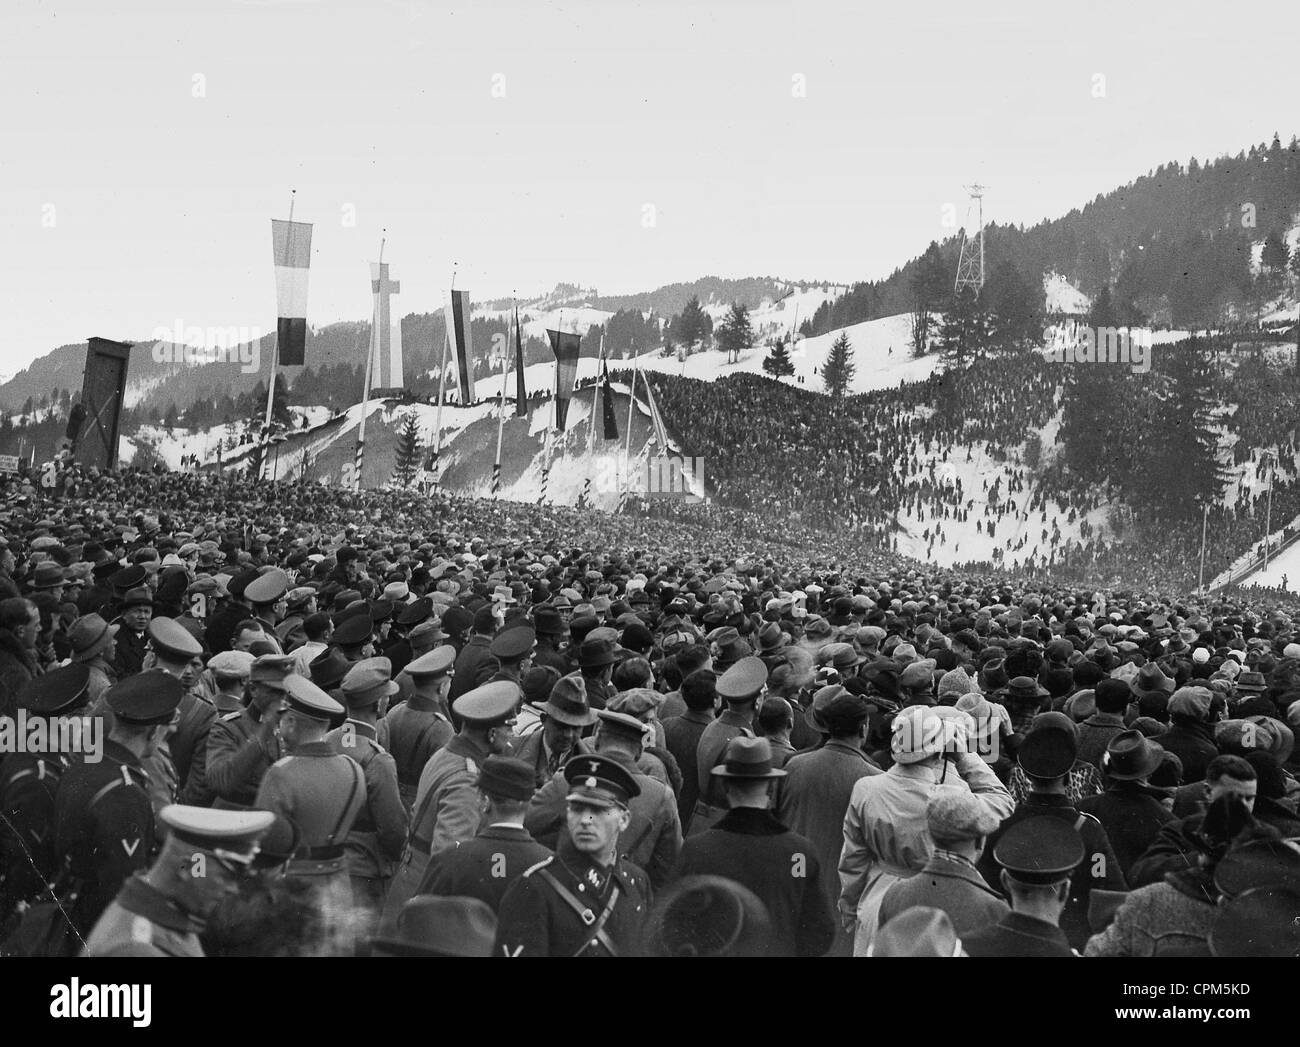 Jacques Benoist-Méchin, Olympic Games 1936., Colour telegram, special ID  card for the Winter Games 1936 in Garmisch-Partenkirchen, photographs of  Jacques Benoist-Méchin at the Winter Games, invitations, name card of von  Tschammer and